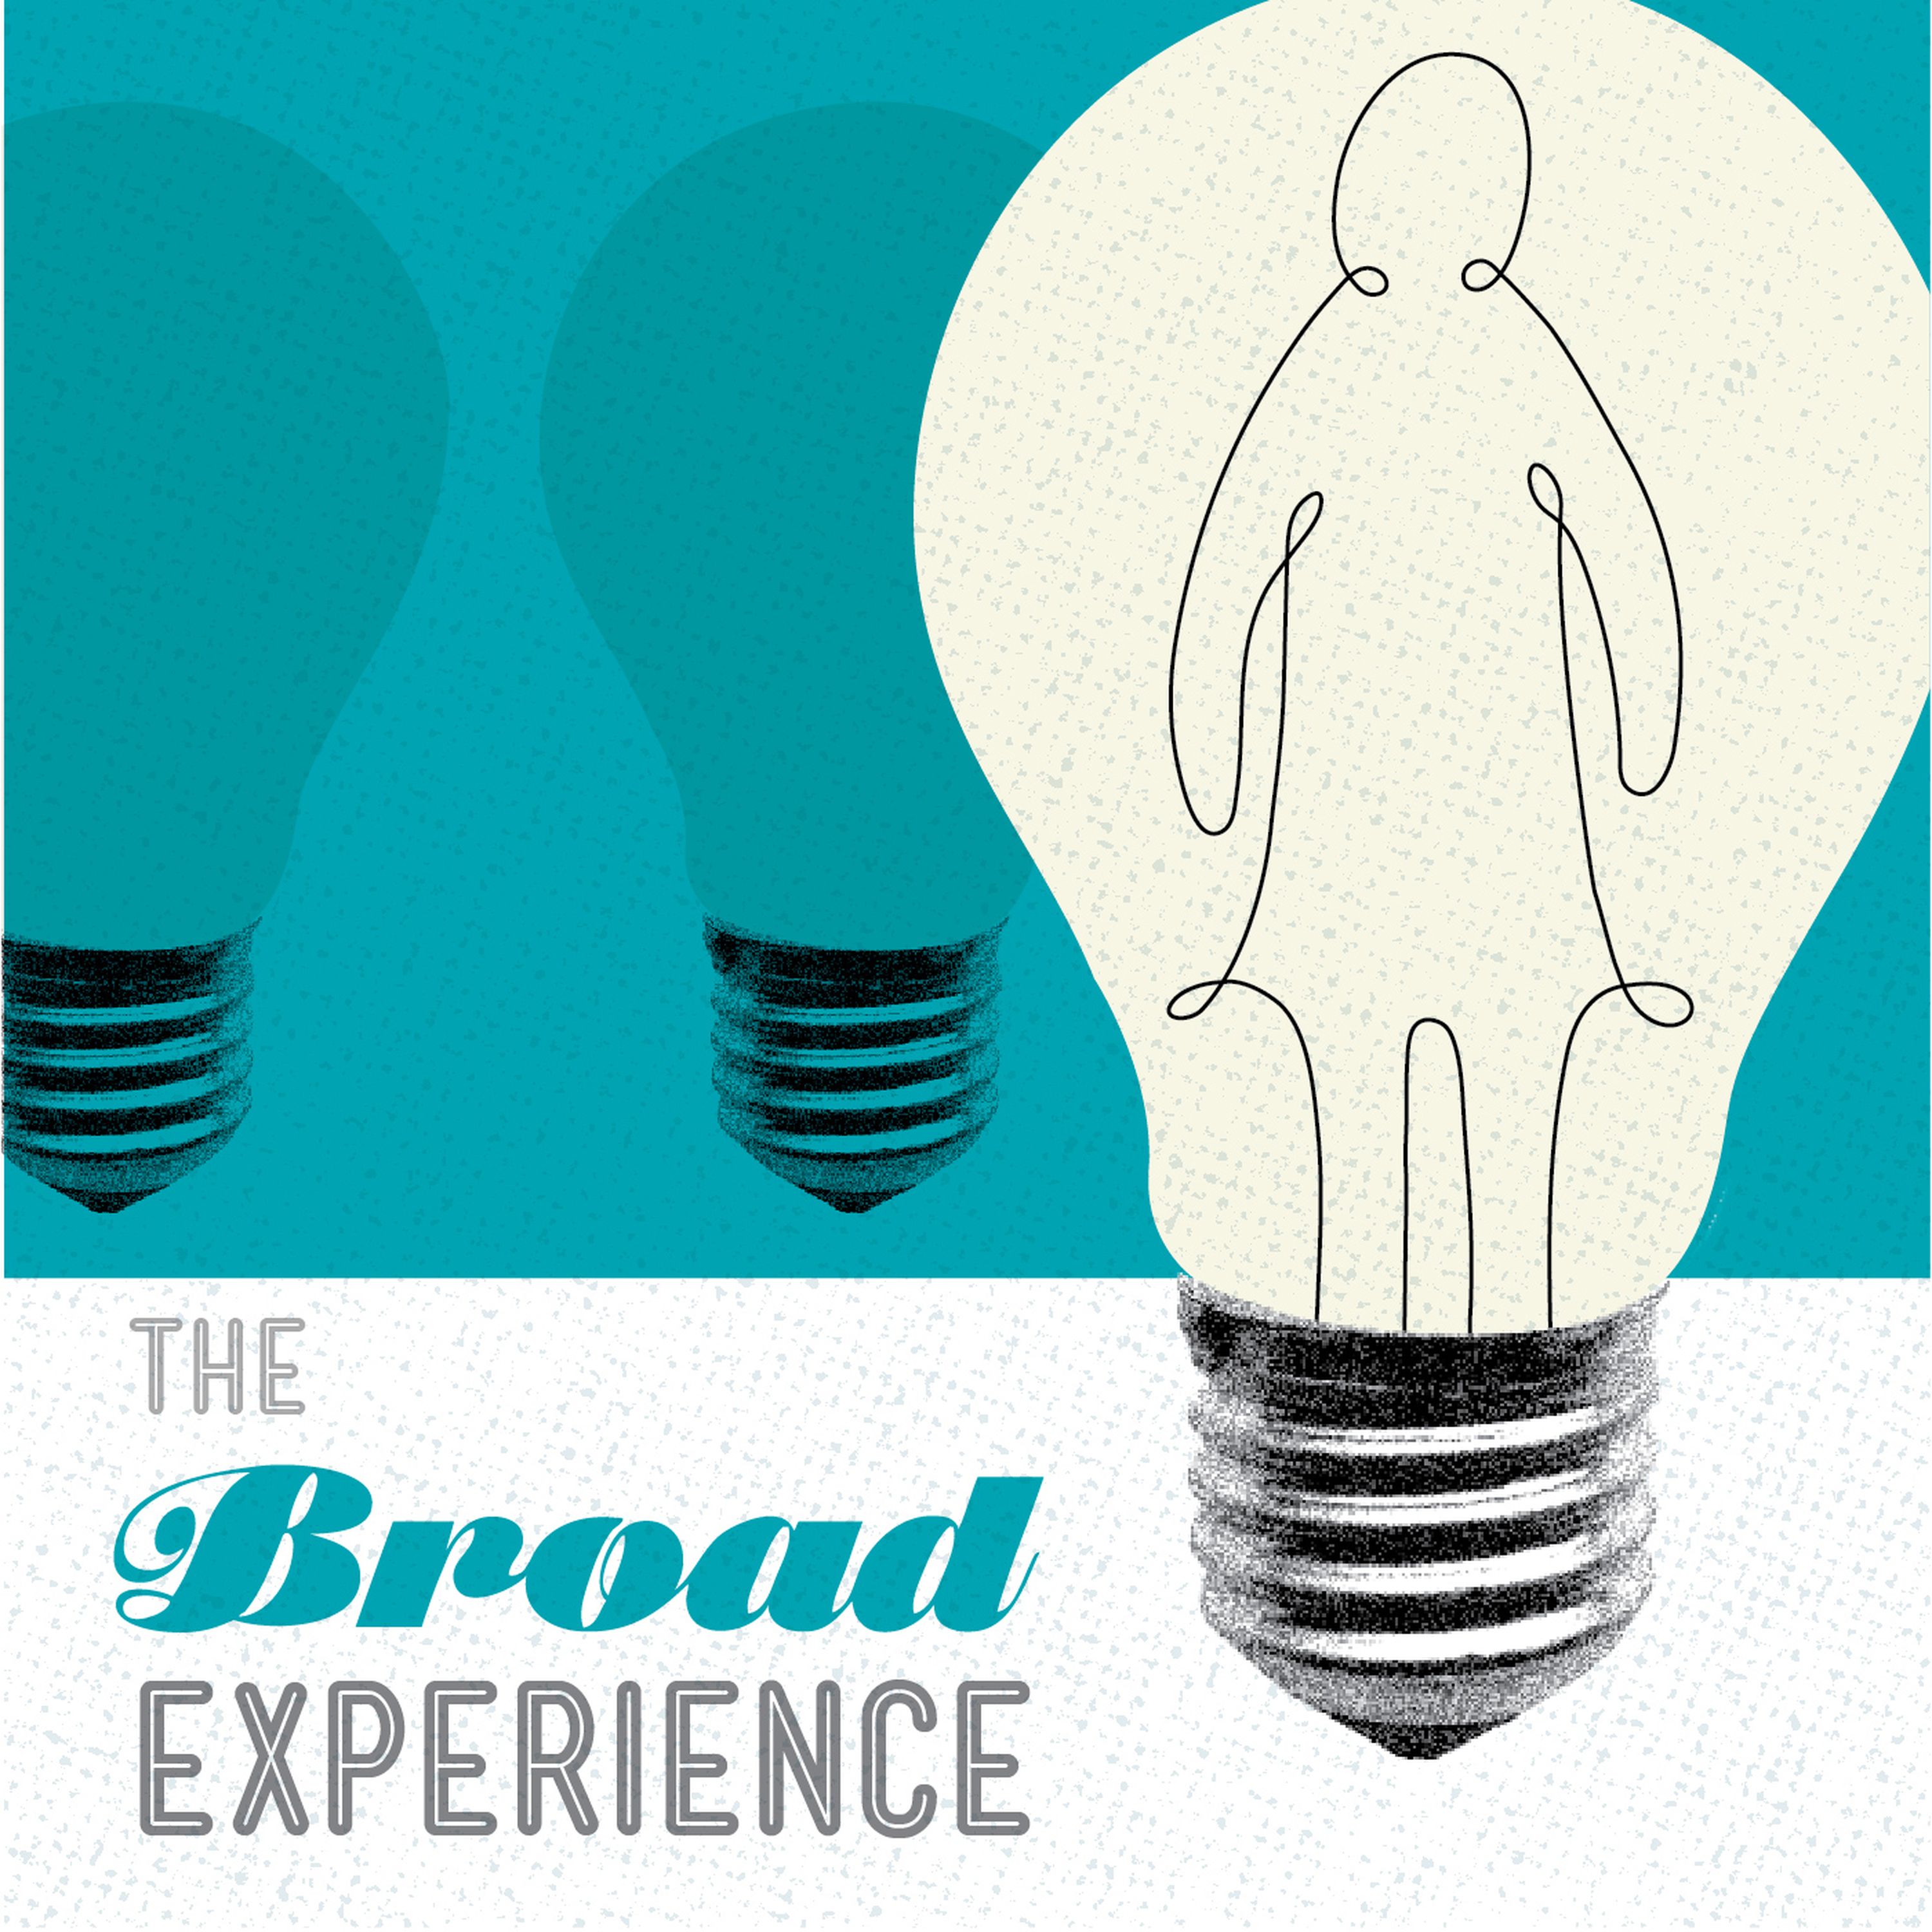 The Broad Experience 58: When Men Stay Home